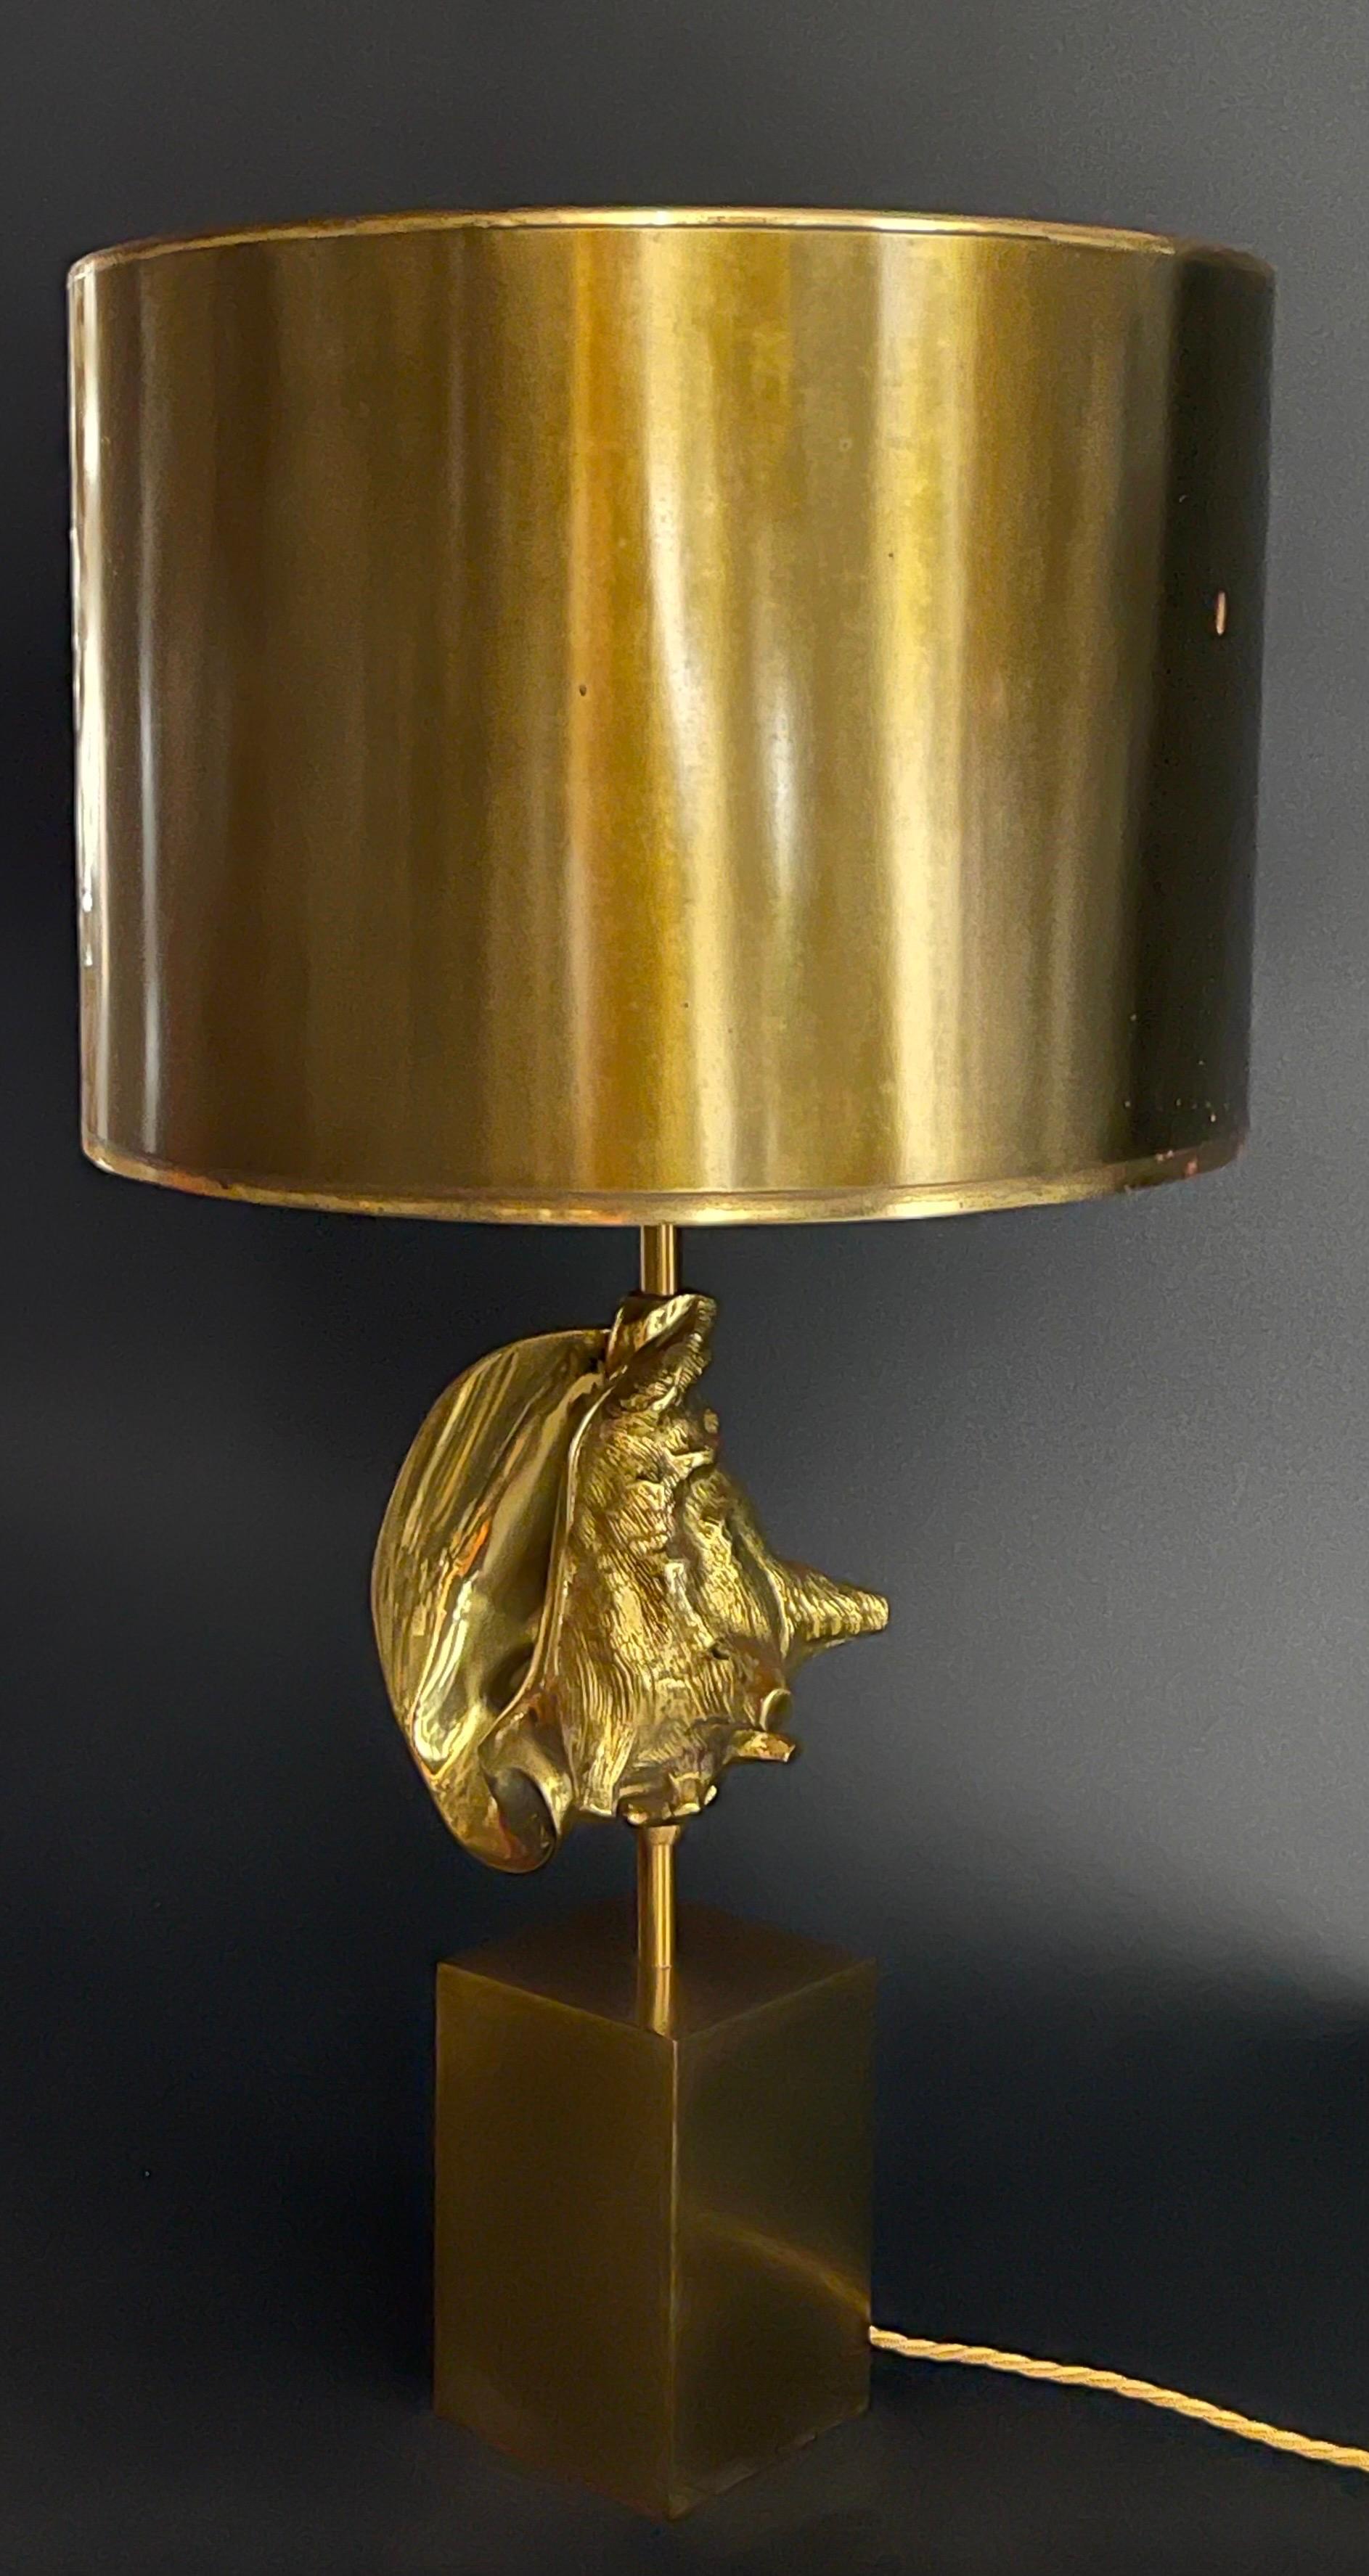 Rare Mid - Century table lamp by Charles & Fils.
This ‘Strombus’ table lamp is designed by Jacques Charles for Maison Charles Paris, in the collection “Marine”, in the 1970s.
This high quality lamp is completely made of brass. 
It needs three